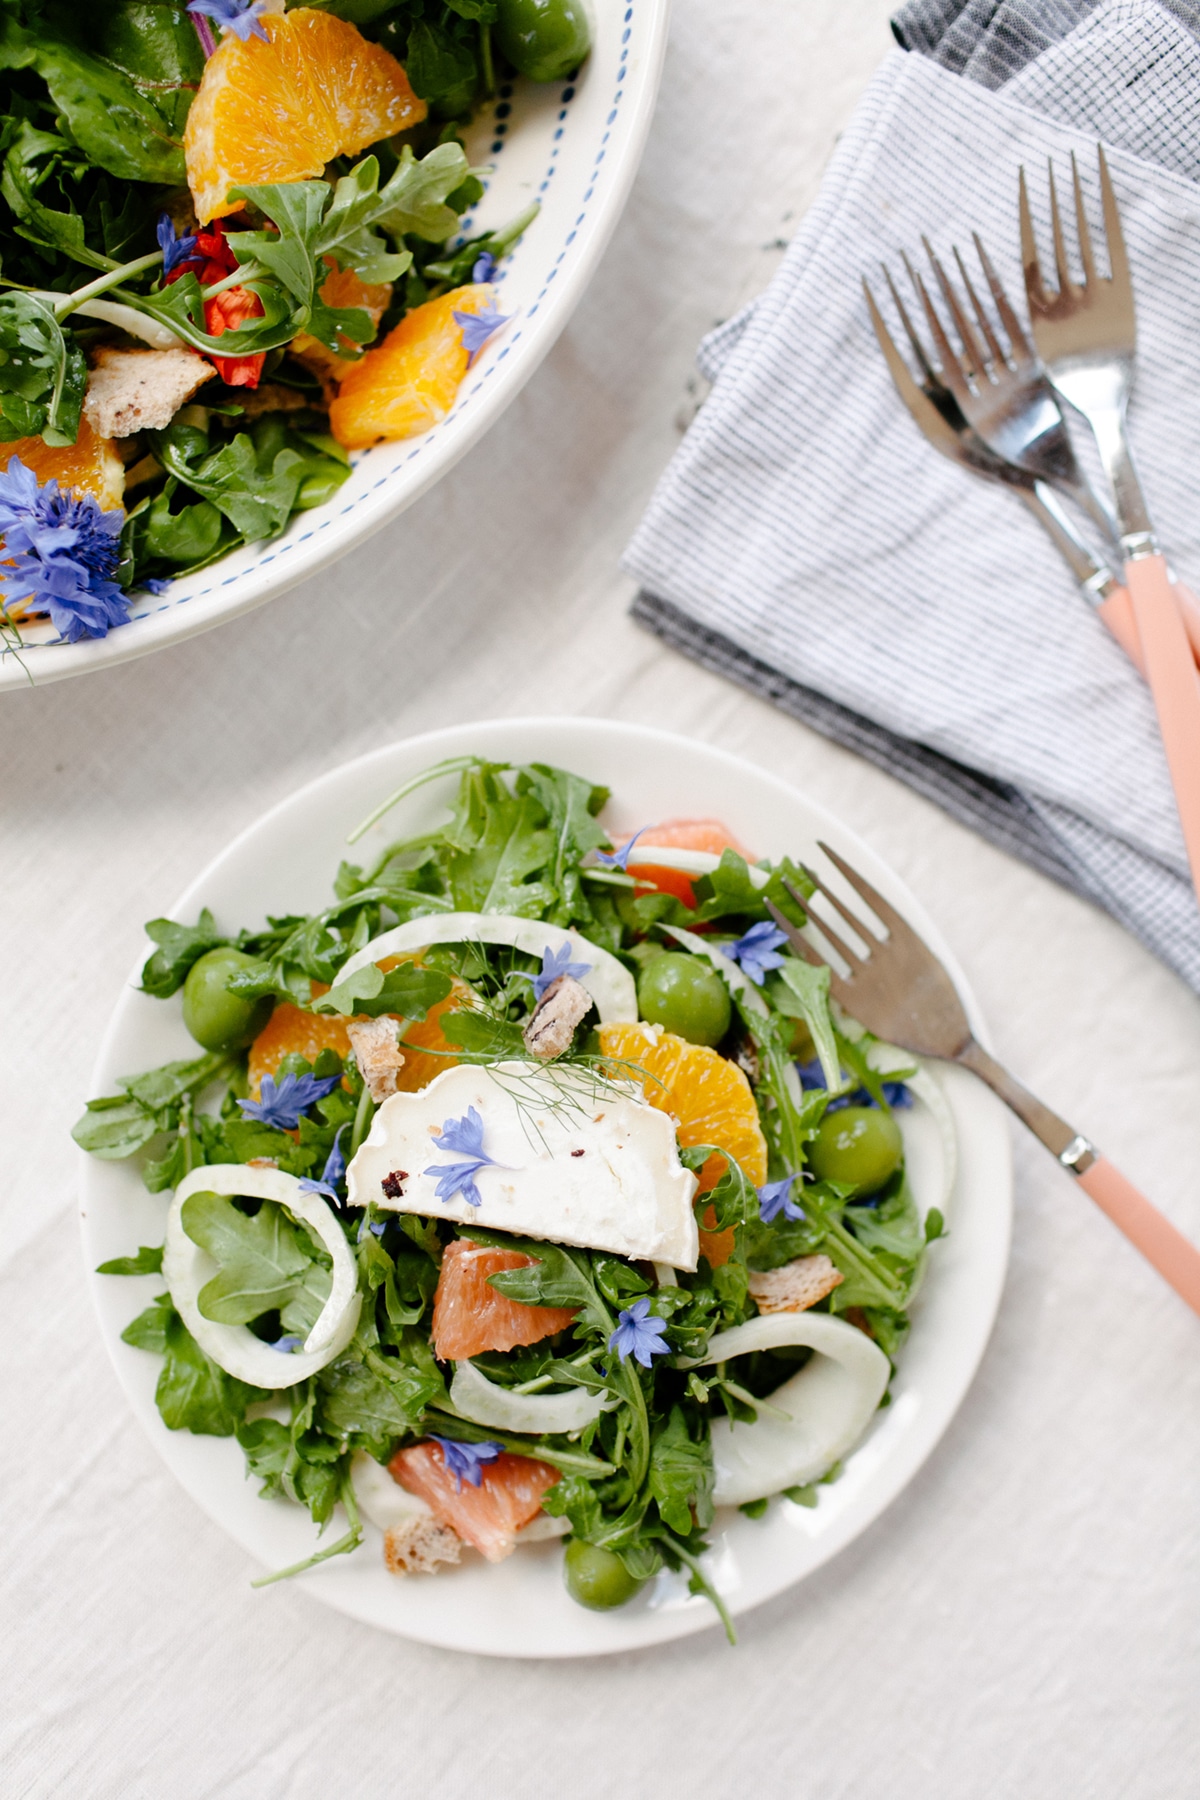 the perfect summer salad - fennel, citrus and greens topped with soft goat cheese | recipe via coco kelley